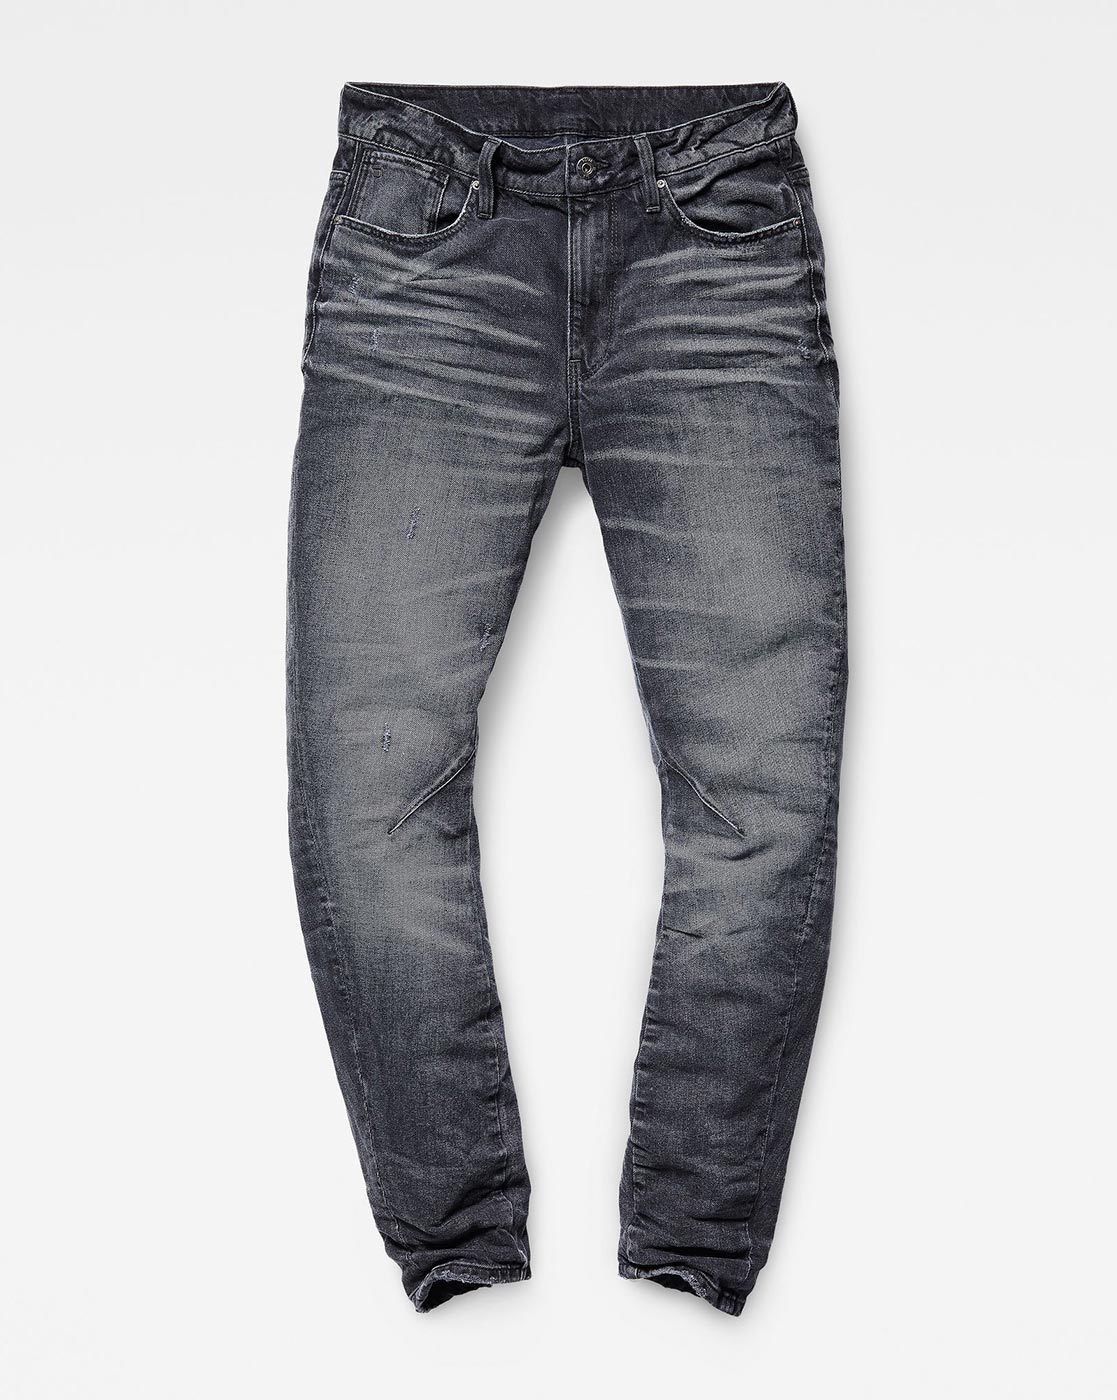 Grey Jeans  Buy Grey Jeans Online Starting at Just 244  Meesho